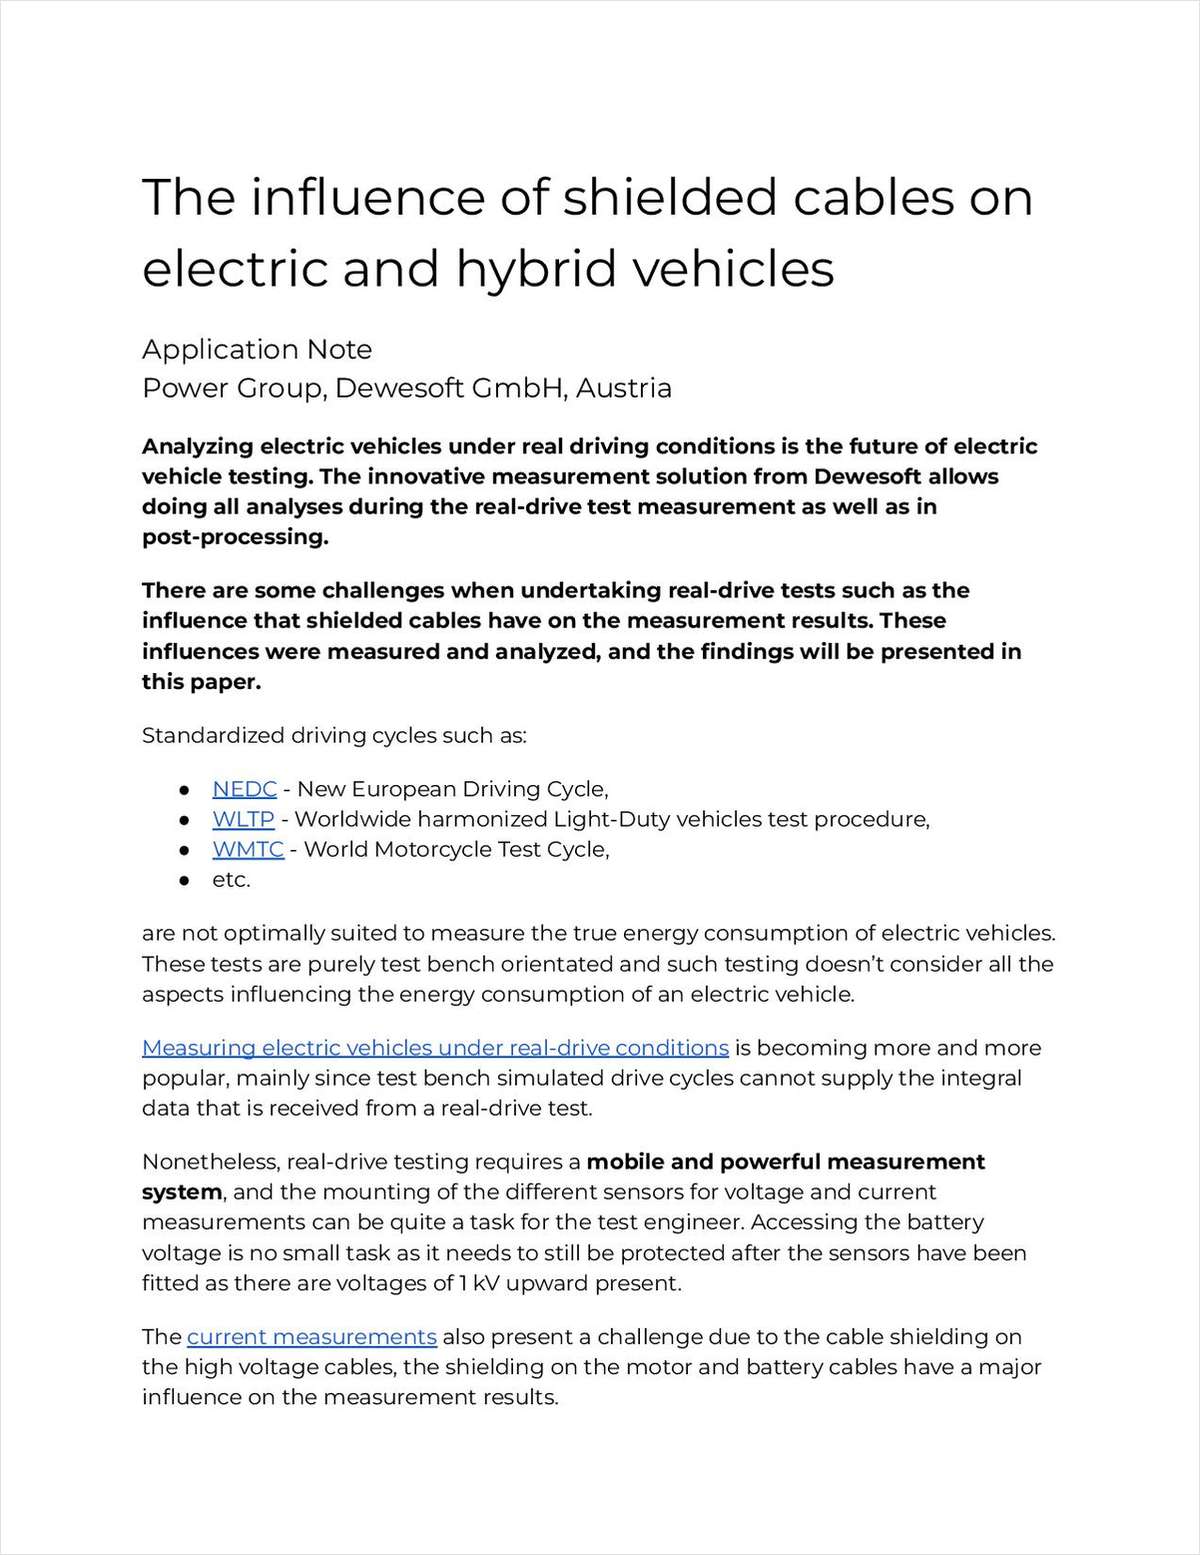 The Influence of Shielded Cables on Electric and Hybrid Vehicles